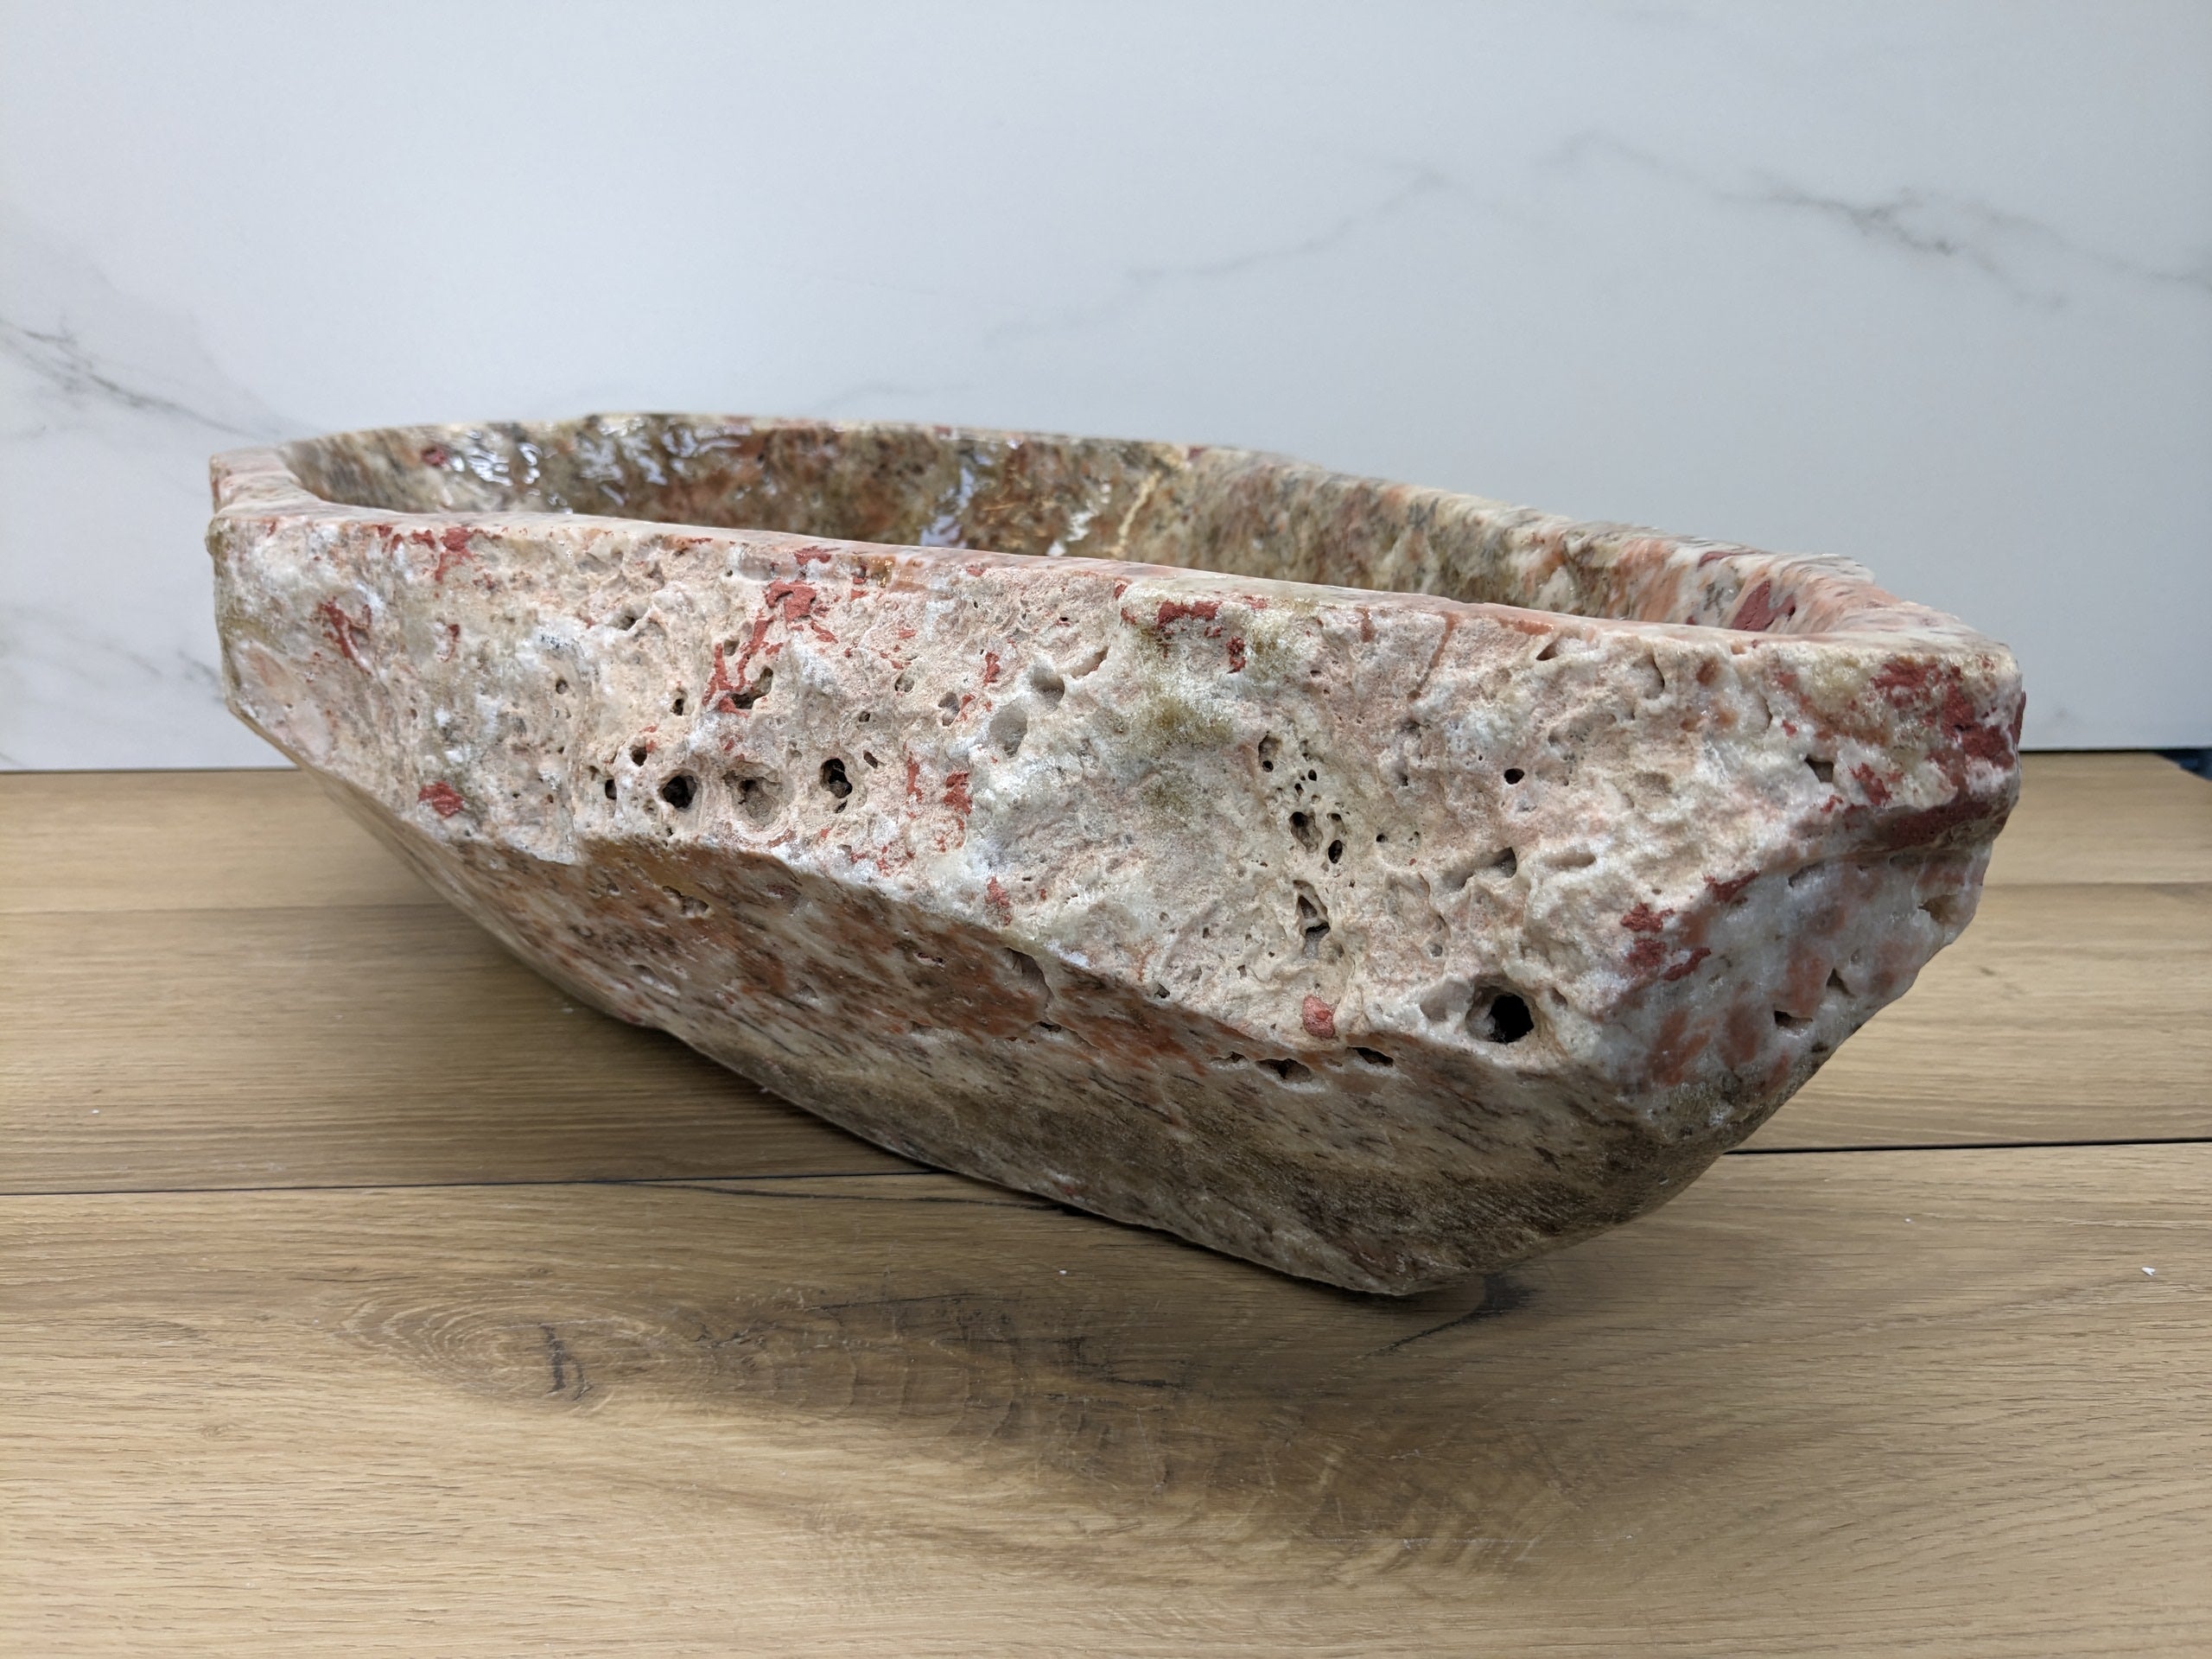 Pink and Brown Onyx Vessel Sink. This sink has an epoxy coating. Handmade in Mexico. We package and ship from the USA. Buy now at www.felipeandgrace.com.